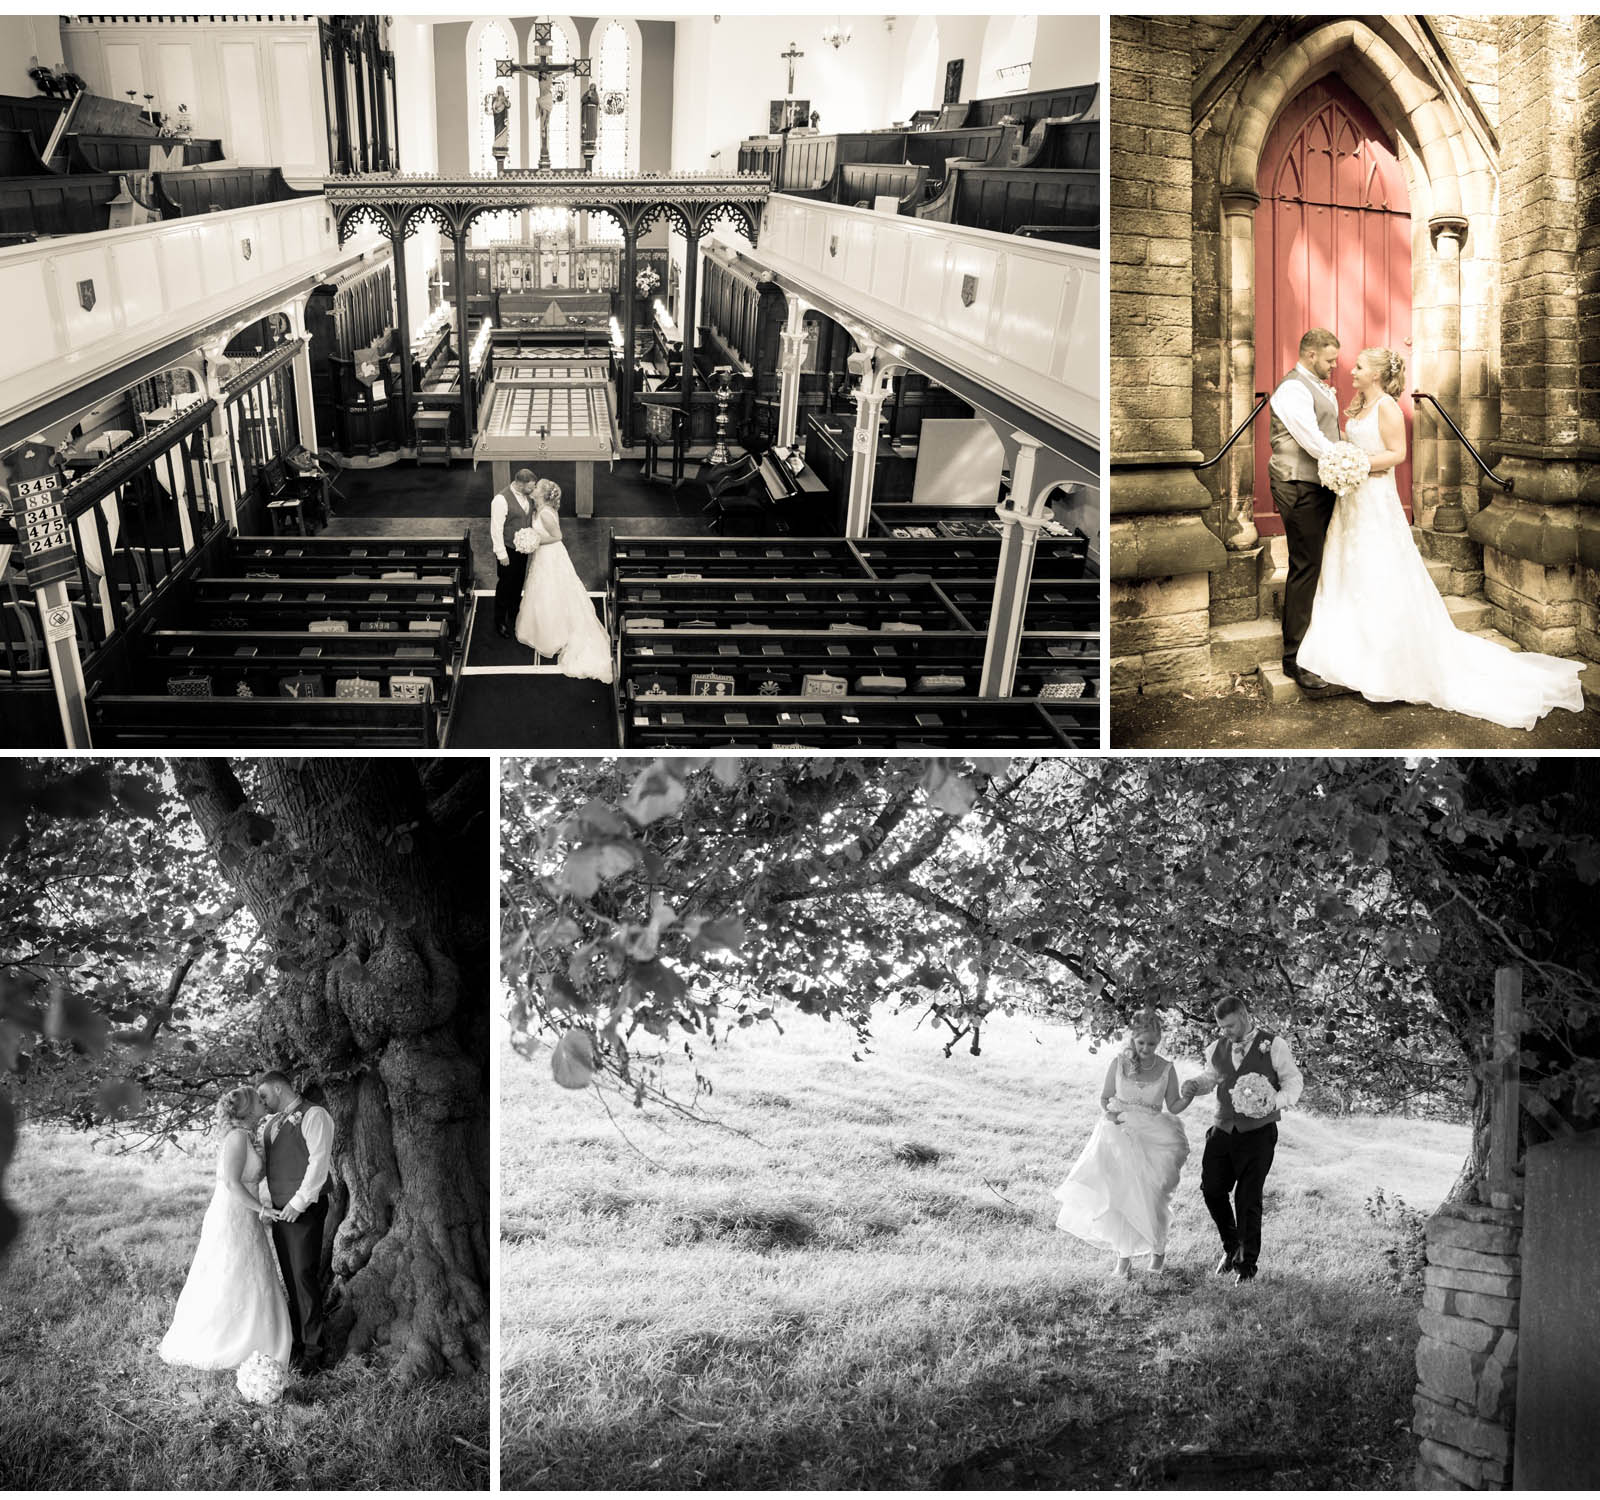 Relaxed and natural wedding photography Kent